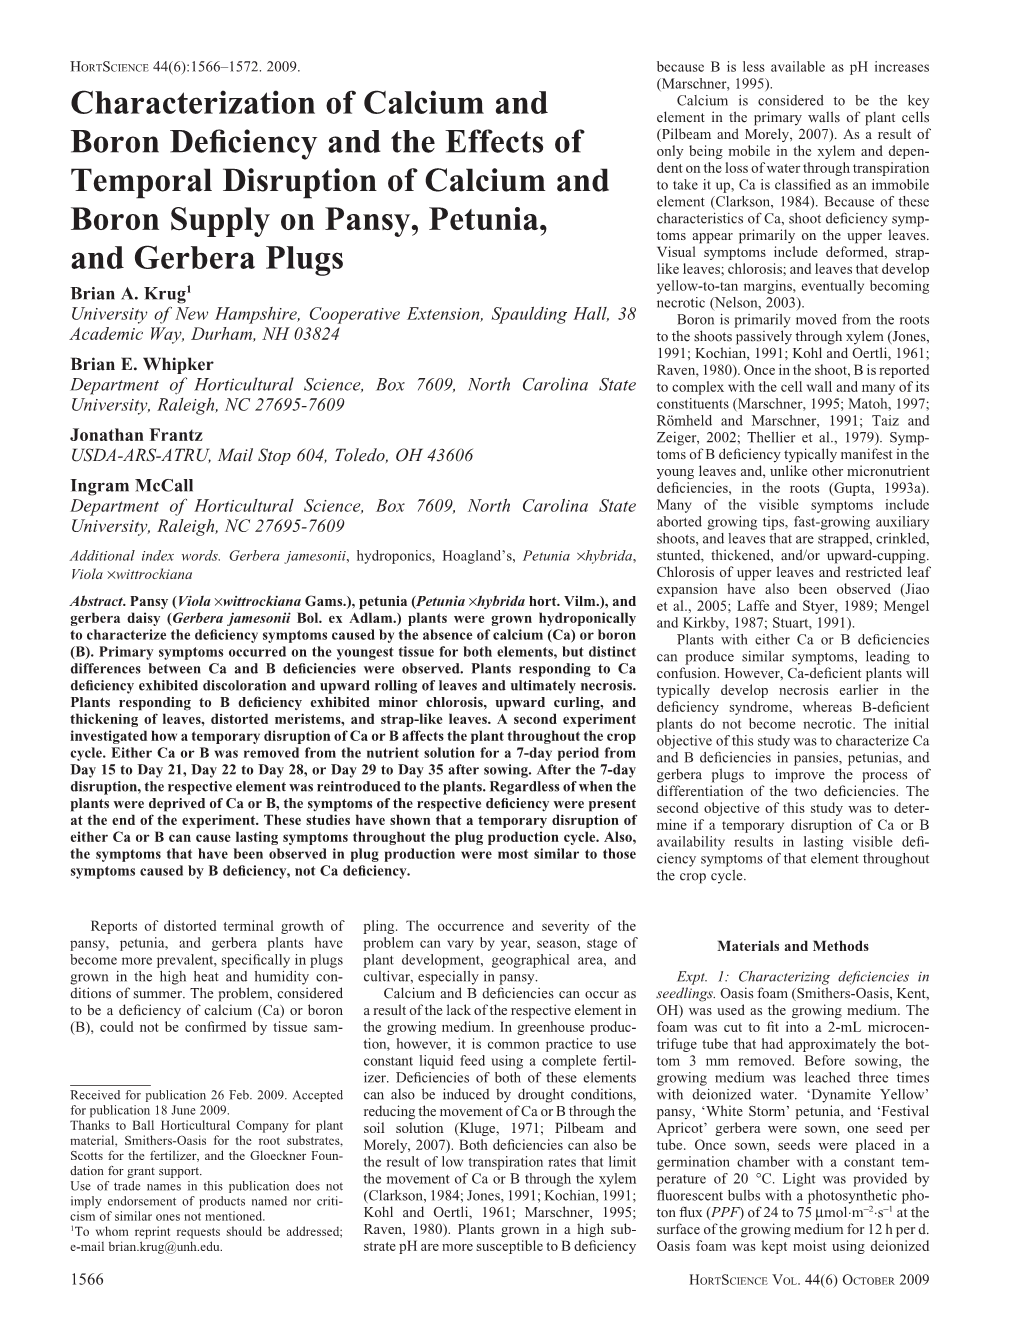 Characterization of Calcium and Boron Deficiency and the Effects Of